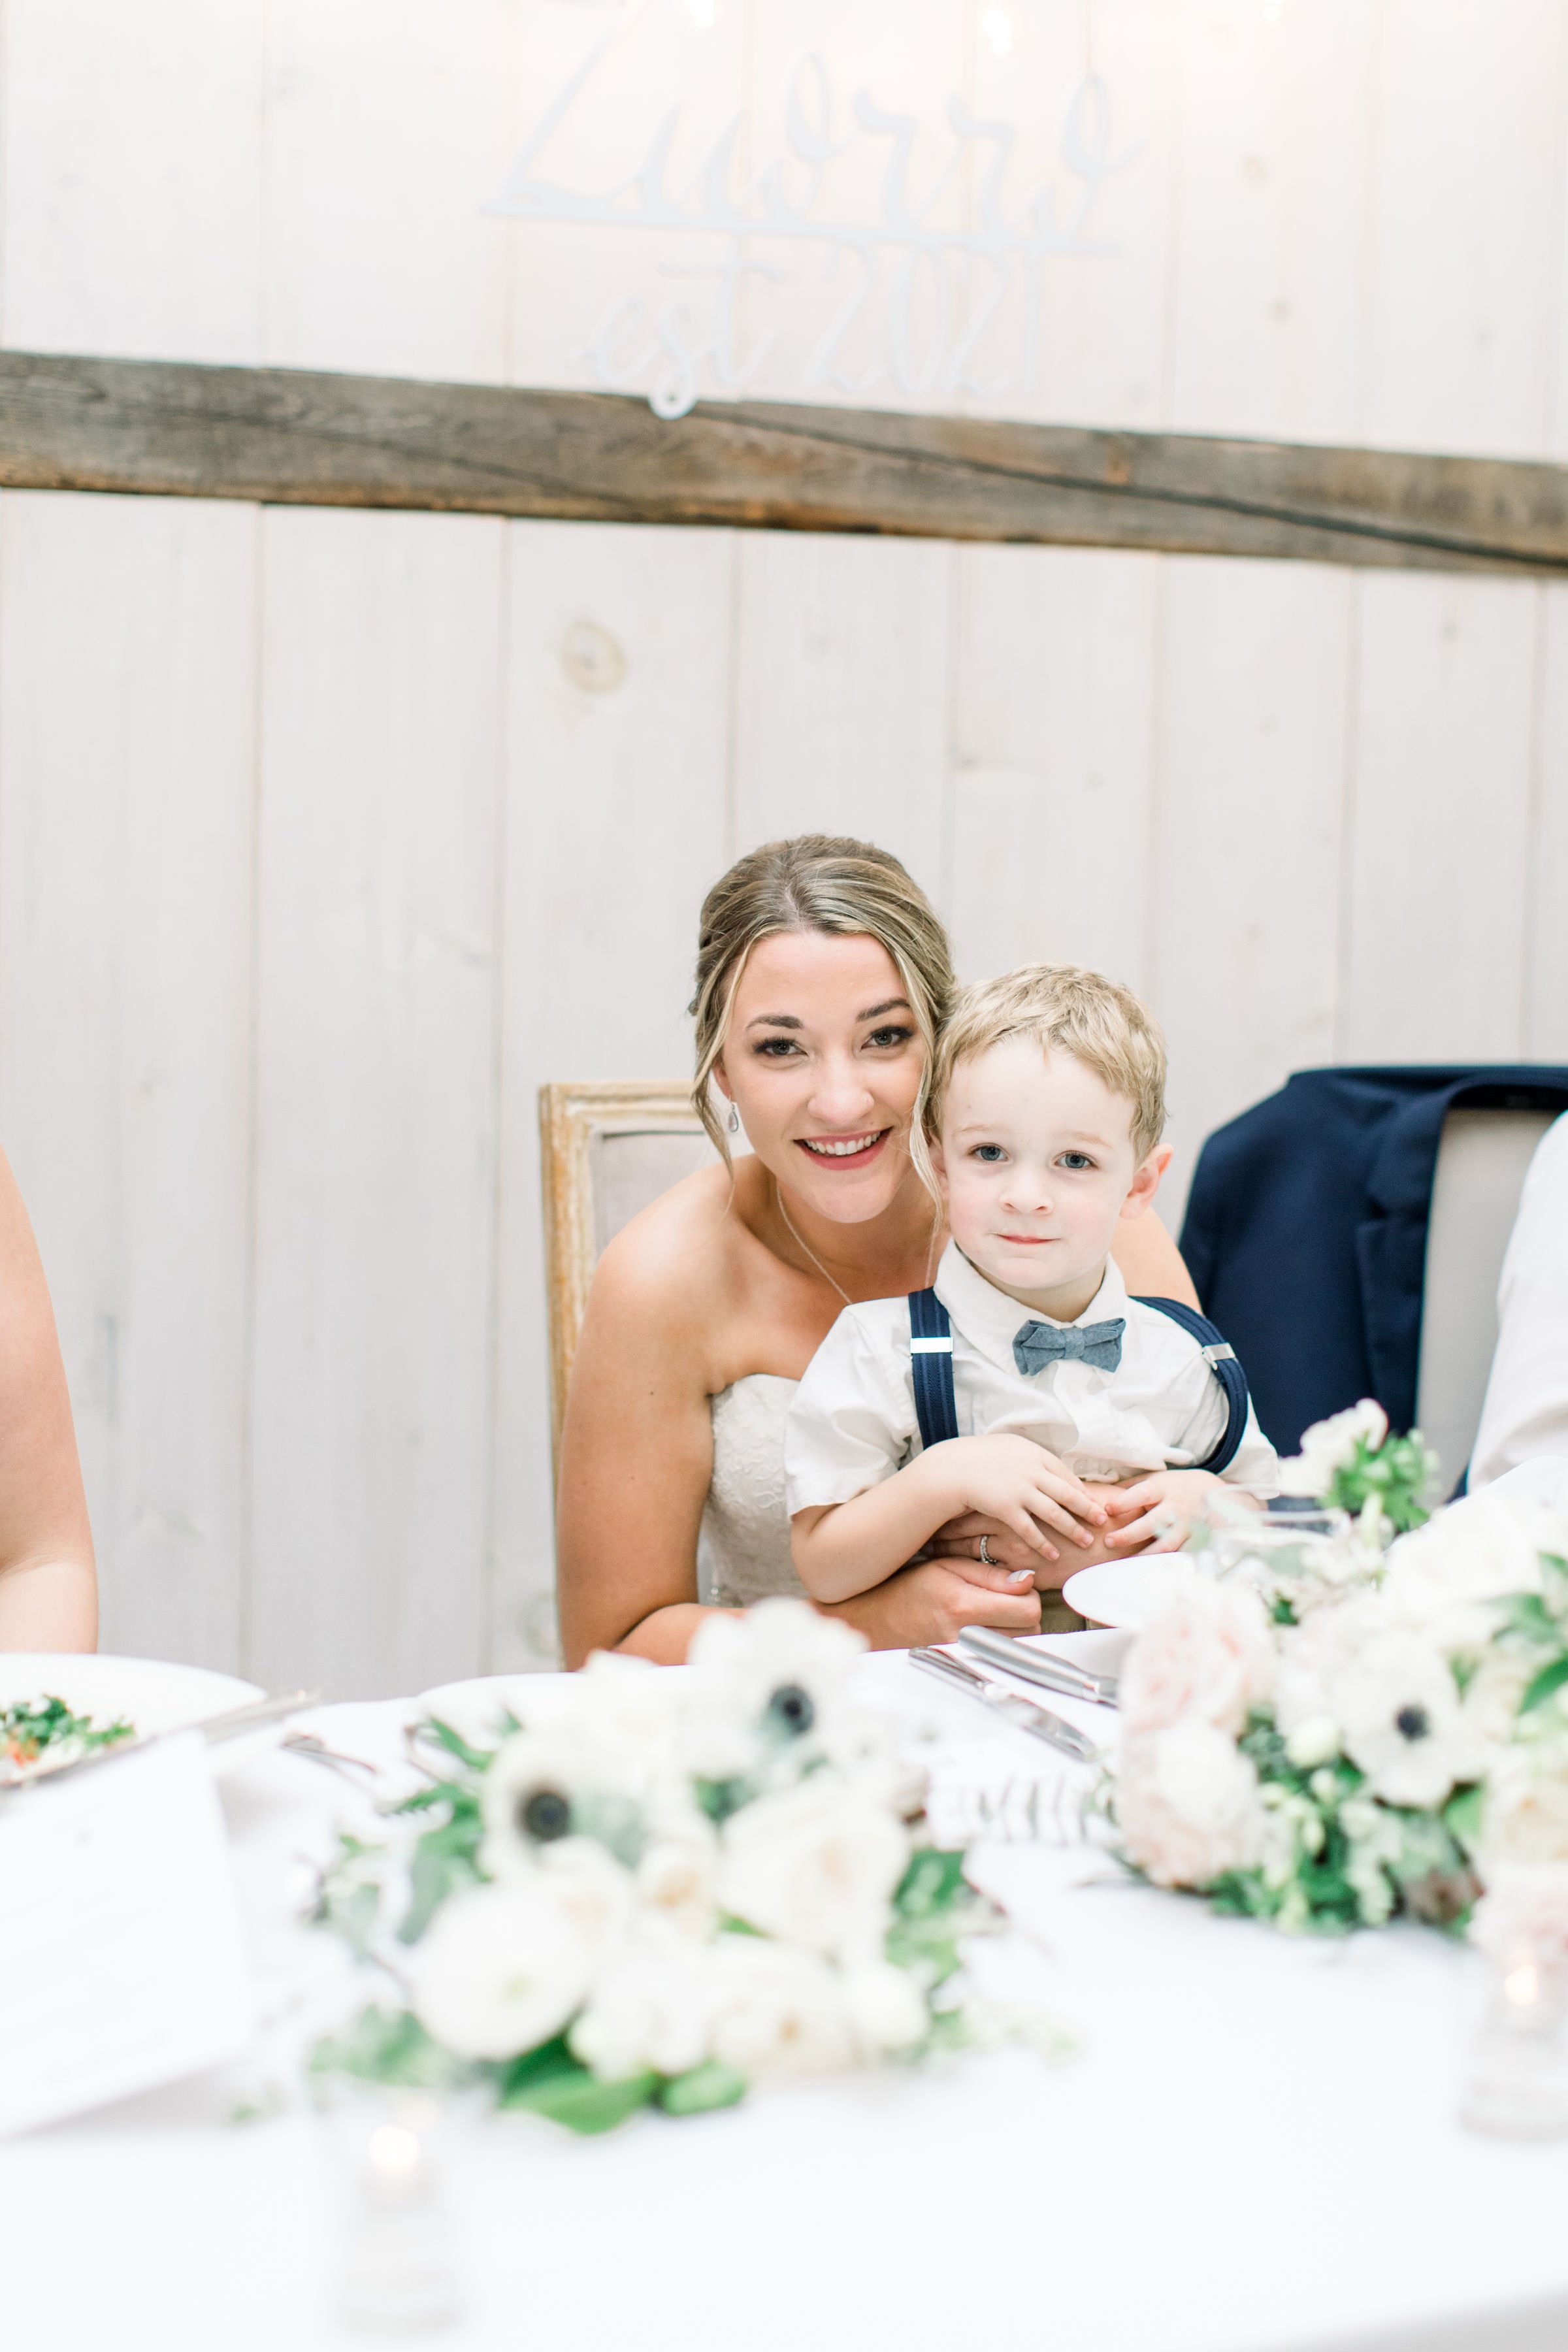  Bride smiles with young ring bearer sitting on her lap by Chelsea Mason Photography. little kids in weddings ring bearer Ontario wed #StonefieldEstates #Ontarioweddings #Chelseamasonphotography #Chelseamasonengagements #Ontarioweddingphotographers 